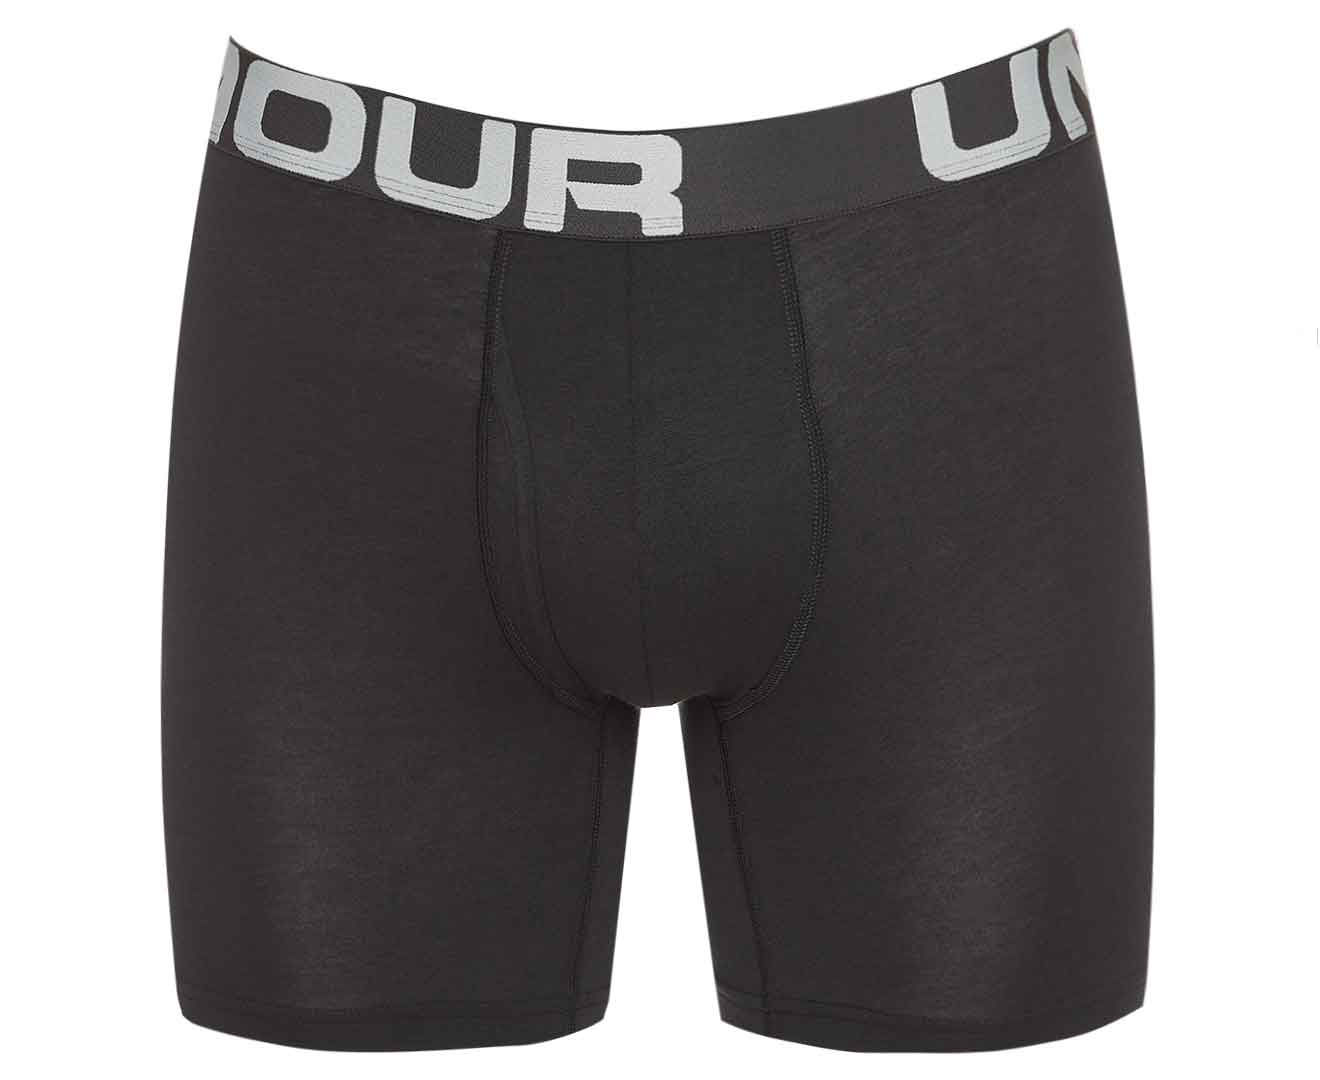 Under Armour Men's Charged Cotton 6 Boxerjock Trunks 3-Pack - Mod  Grey/Charcoal Heather/Black